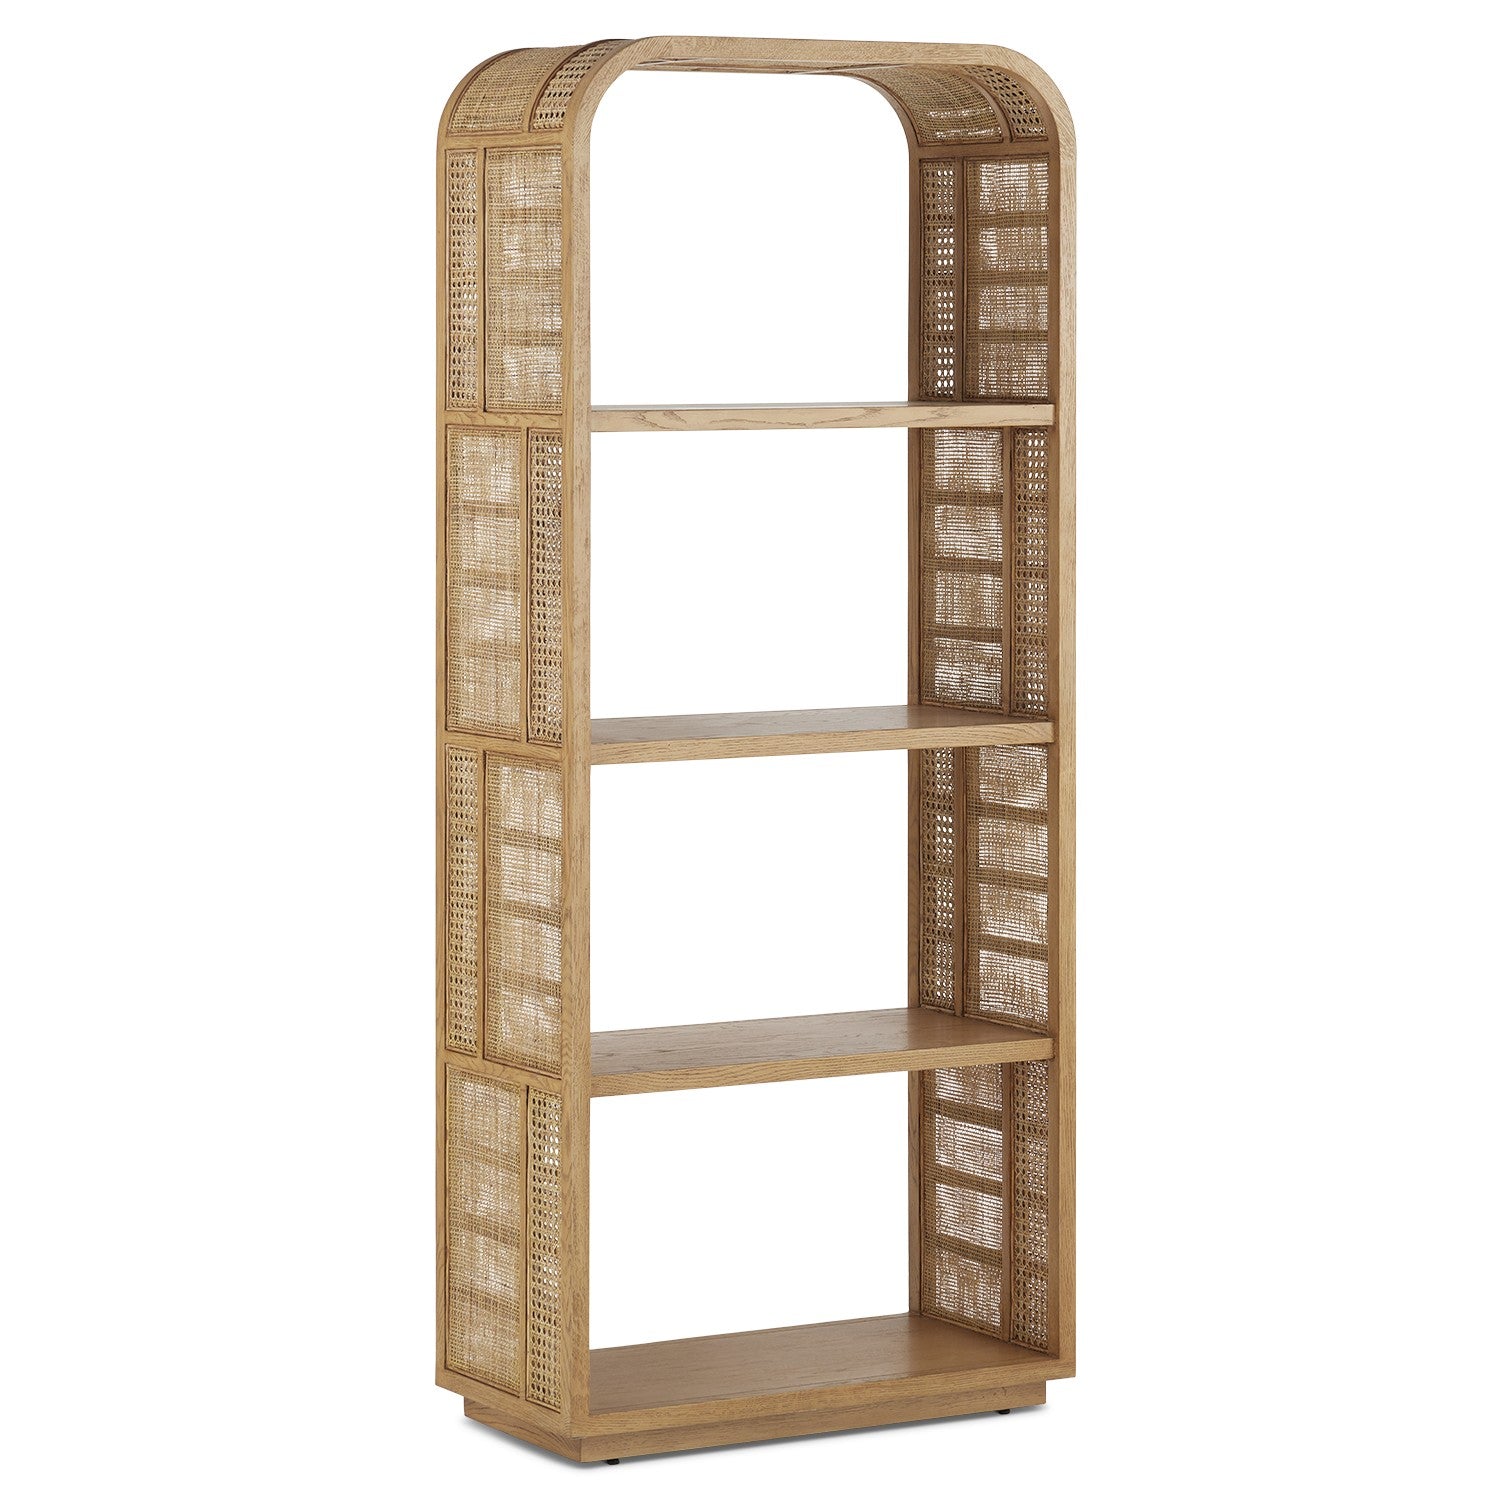 Currey and Company - 3000-0234 - Etagere - Natural